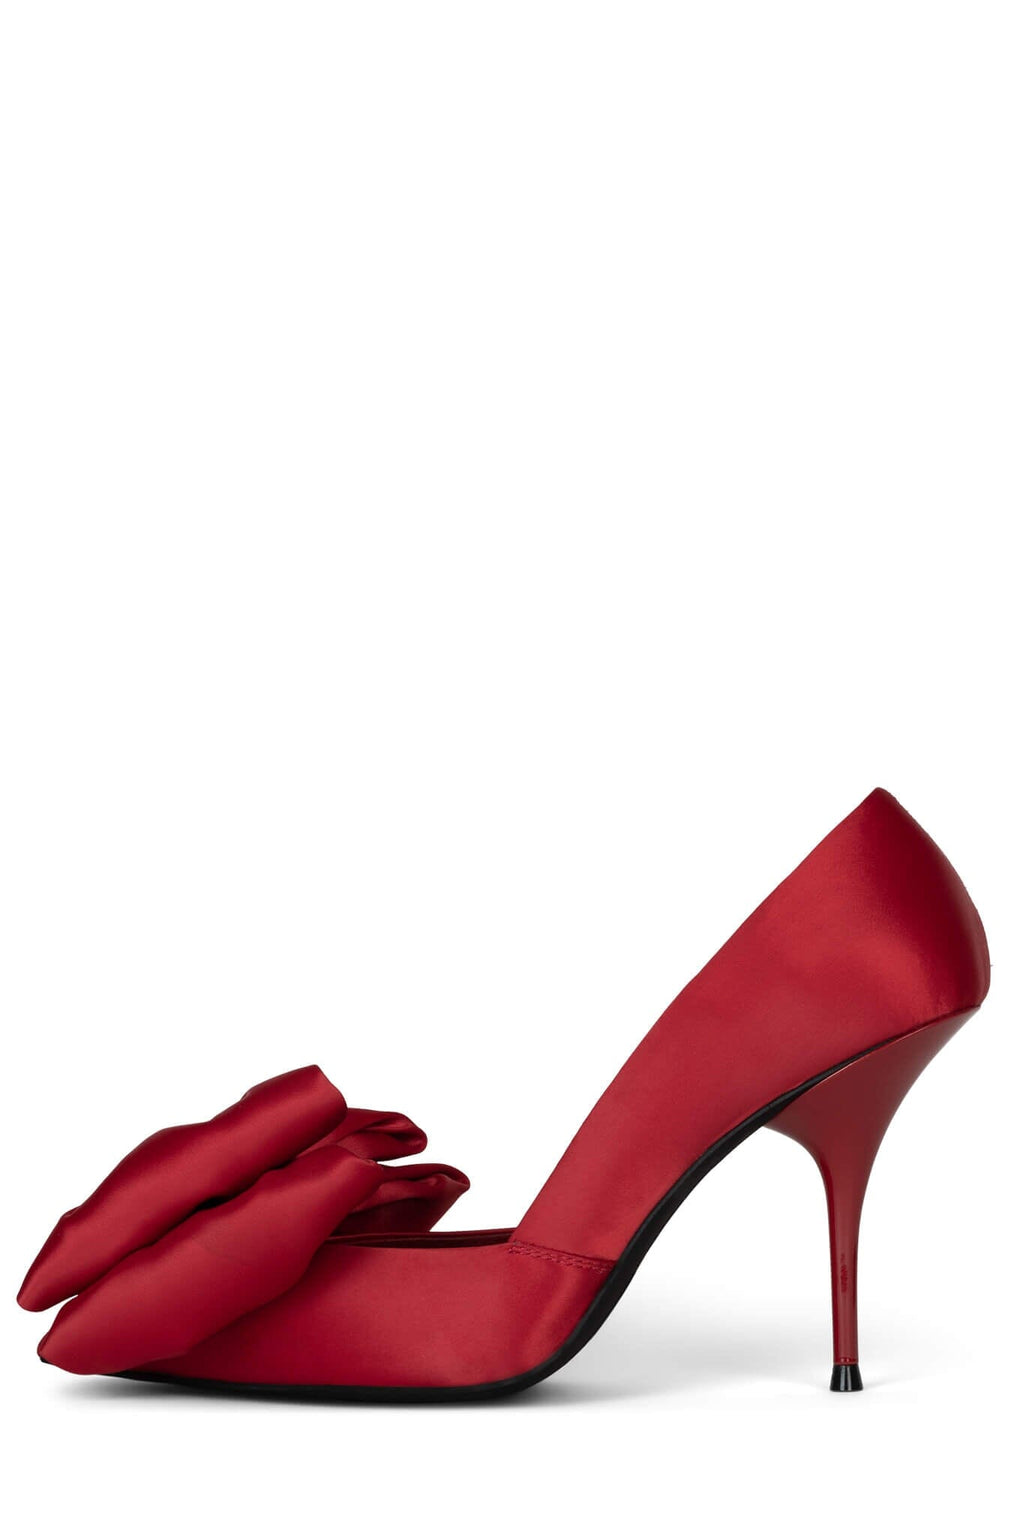 CONVINCE-B Pump YYH Red Satin 6 